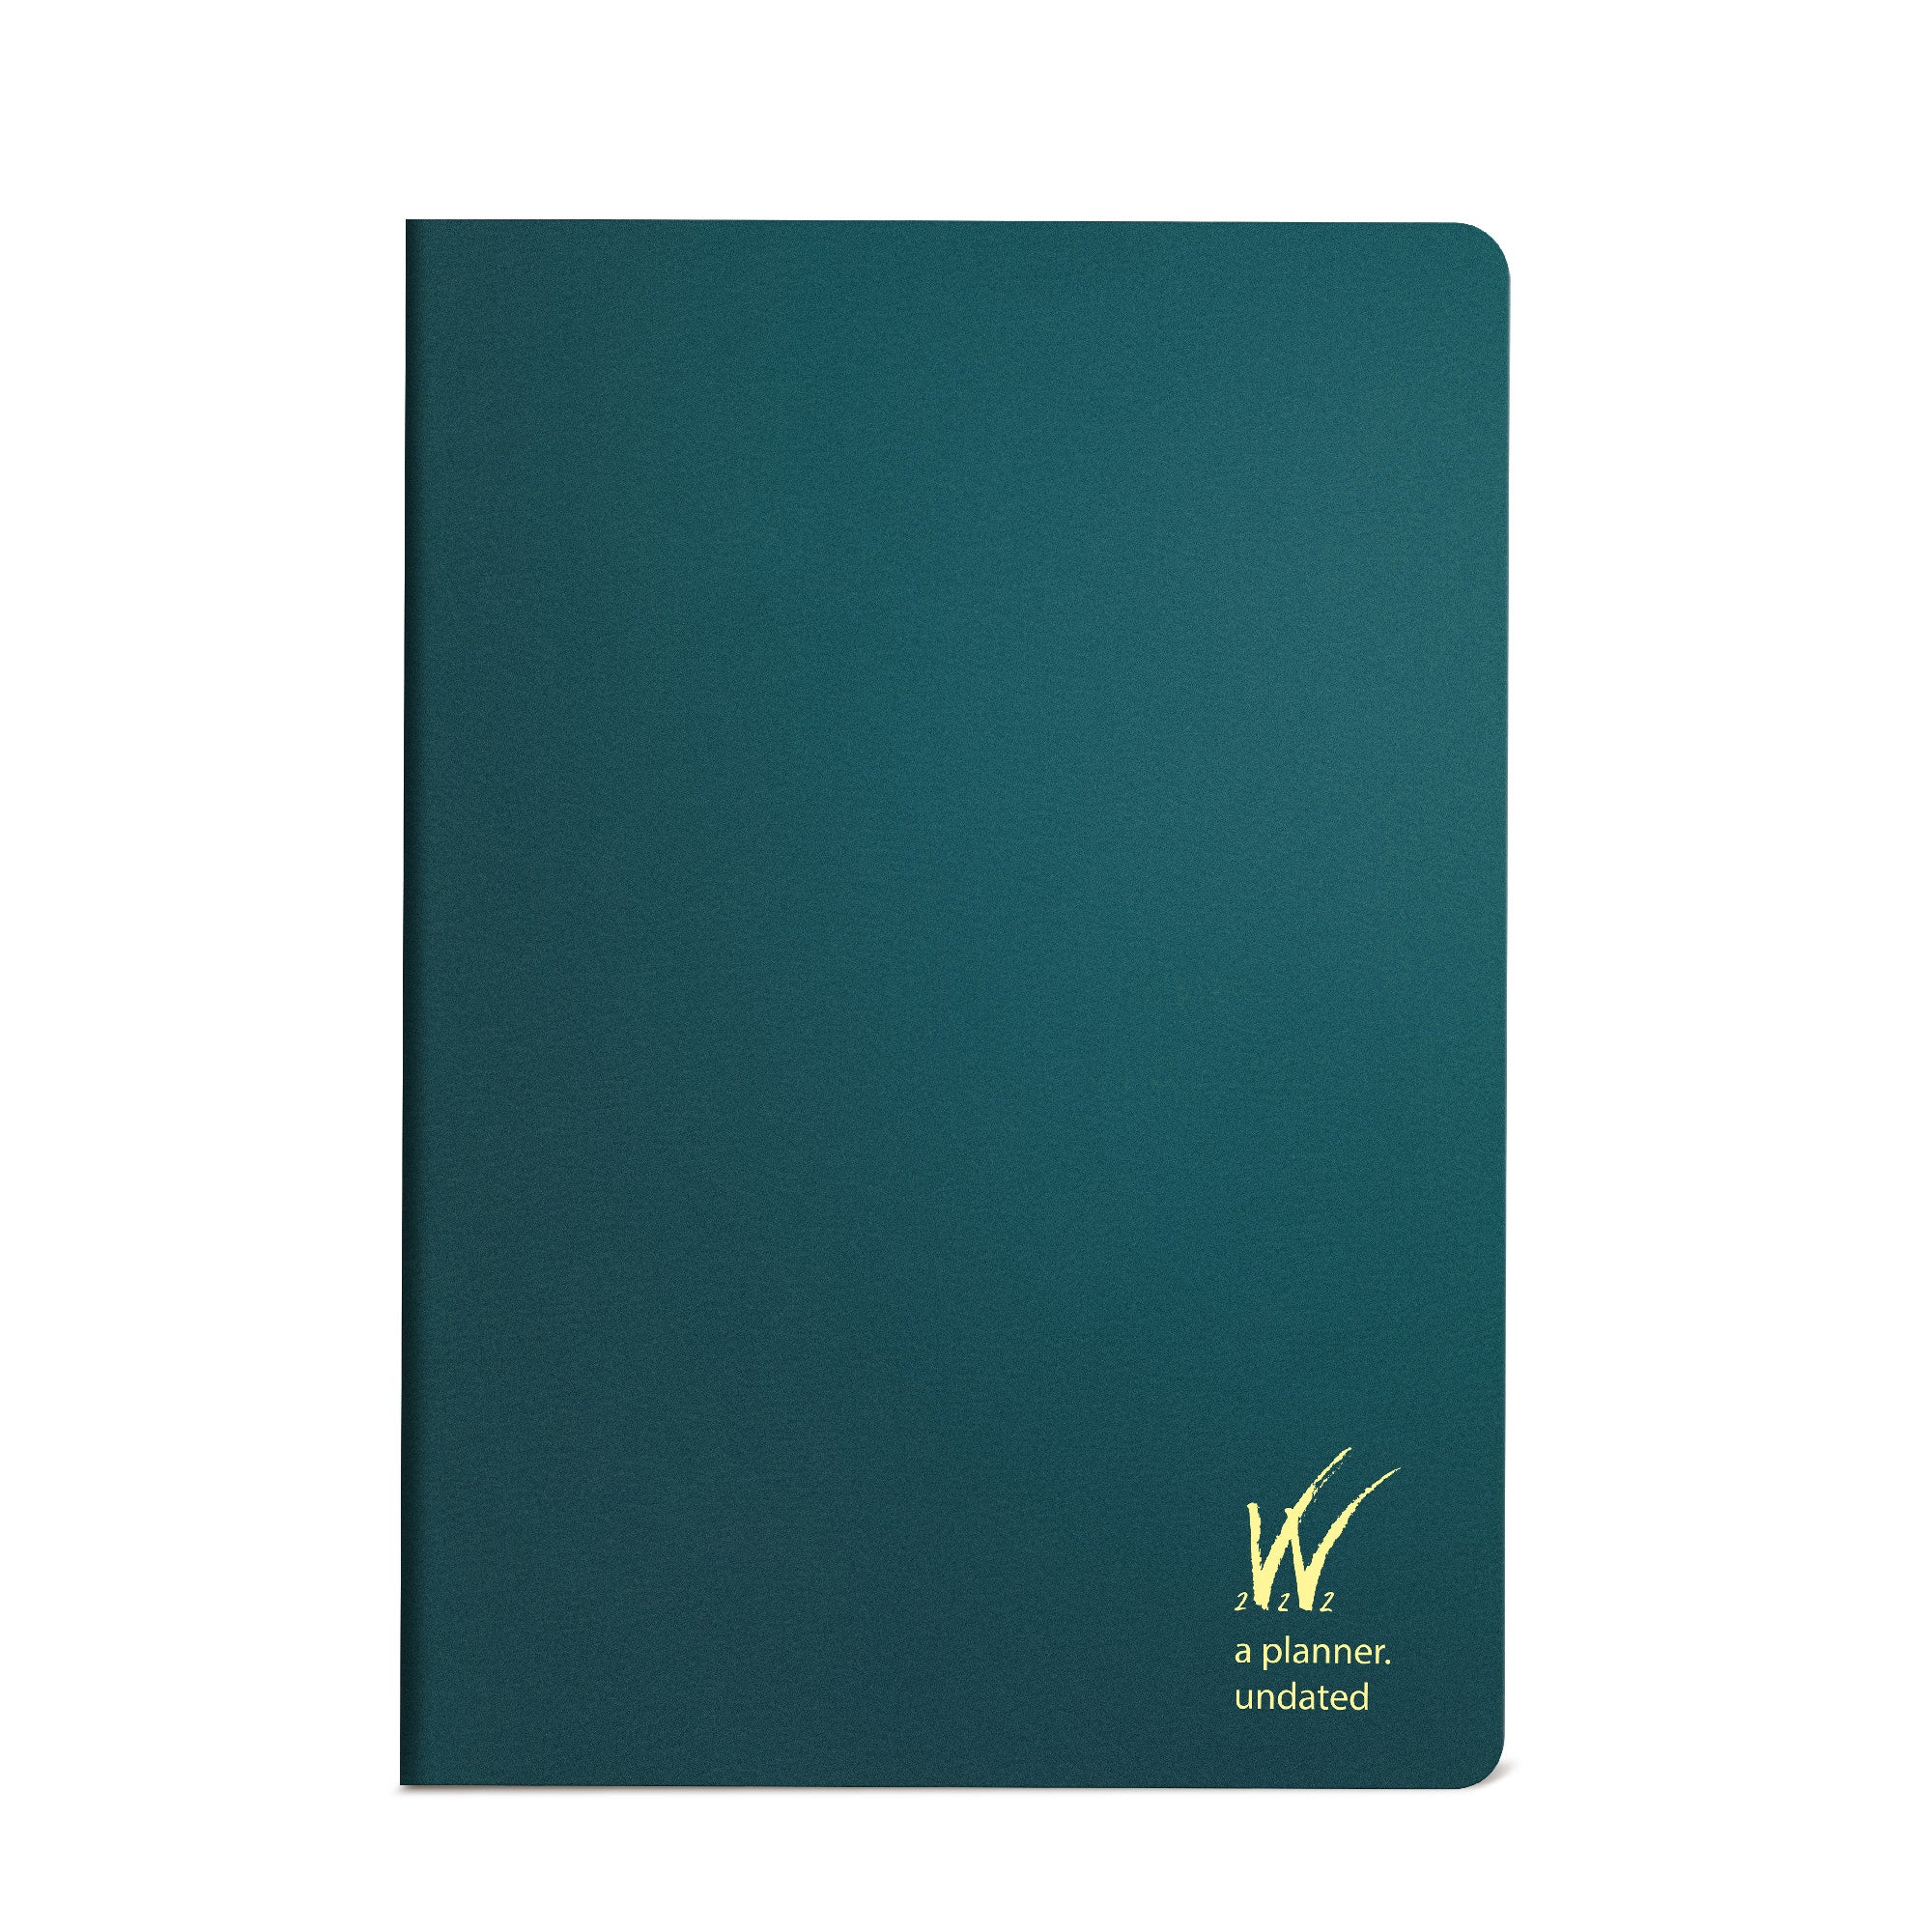 Sale | 2022 A5 Weekly Planner - 52gsm Tomoe River Paper